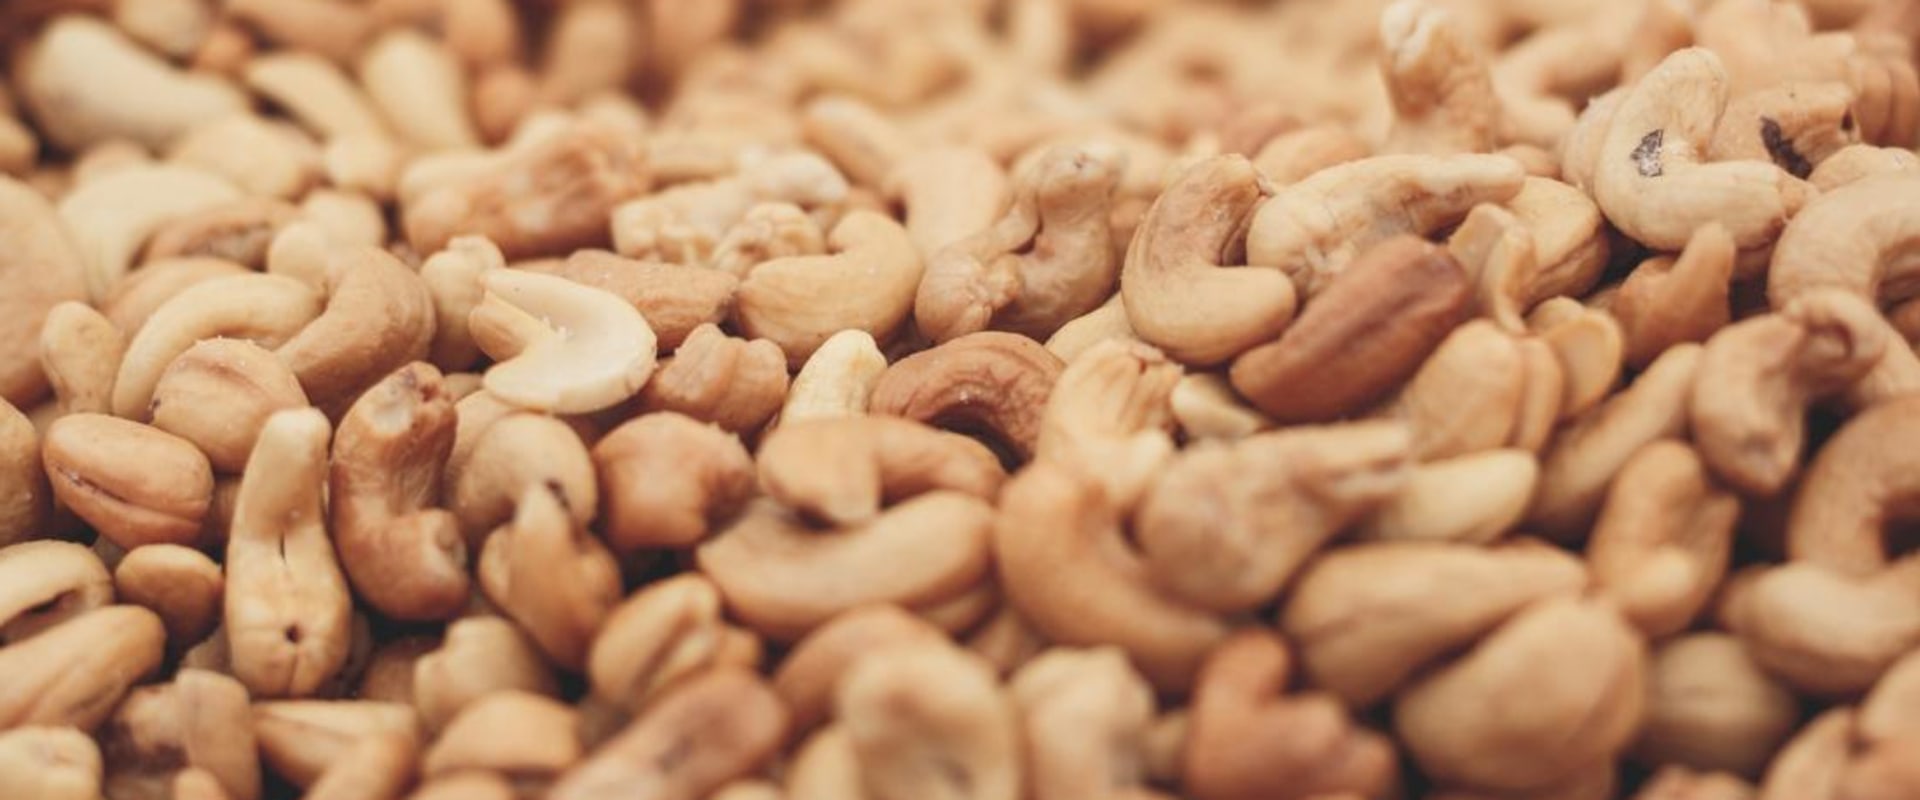 How long are cashew nuts good for?